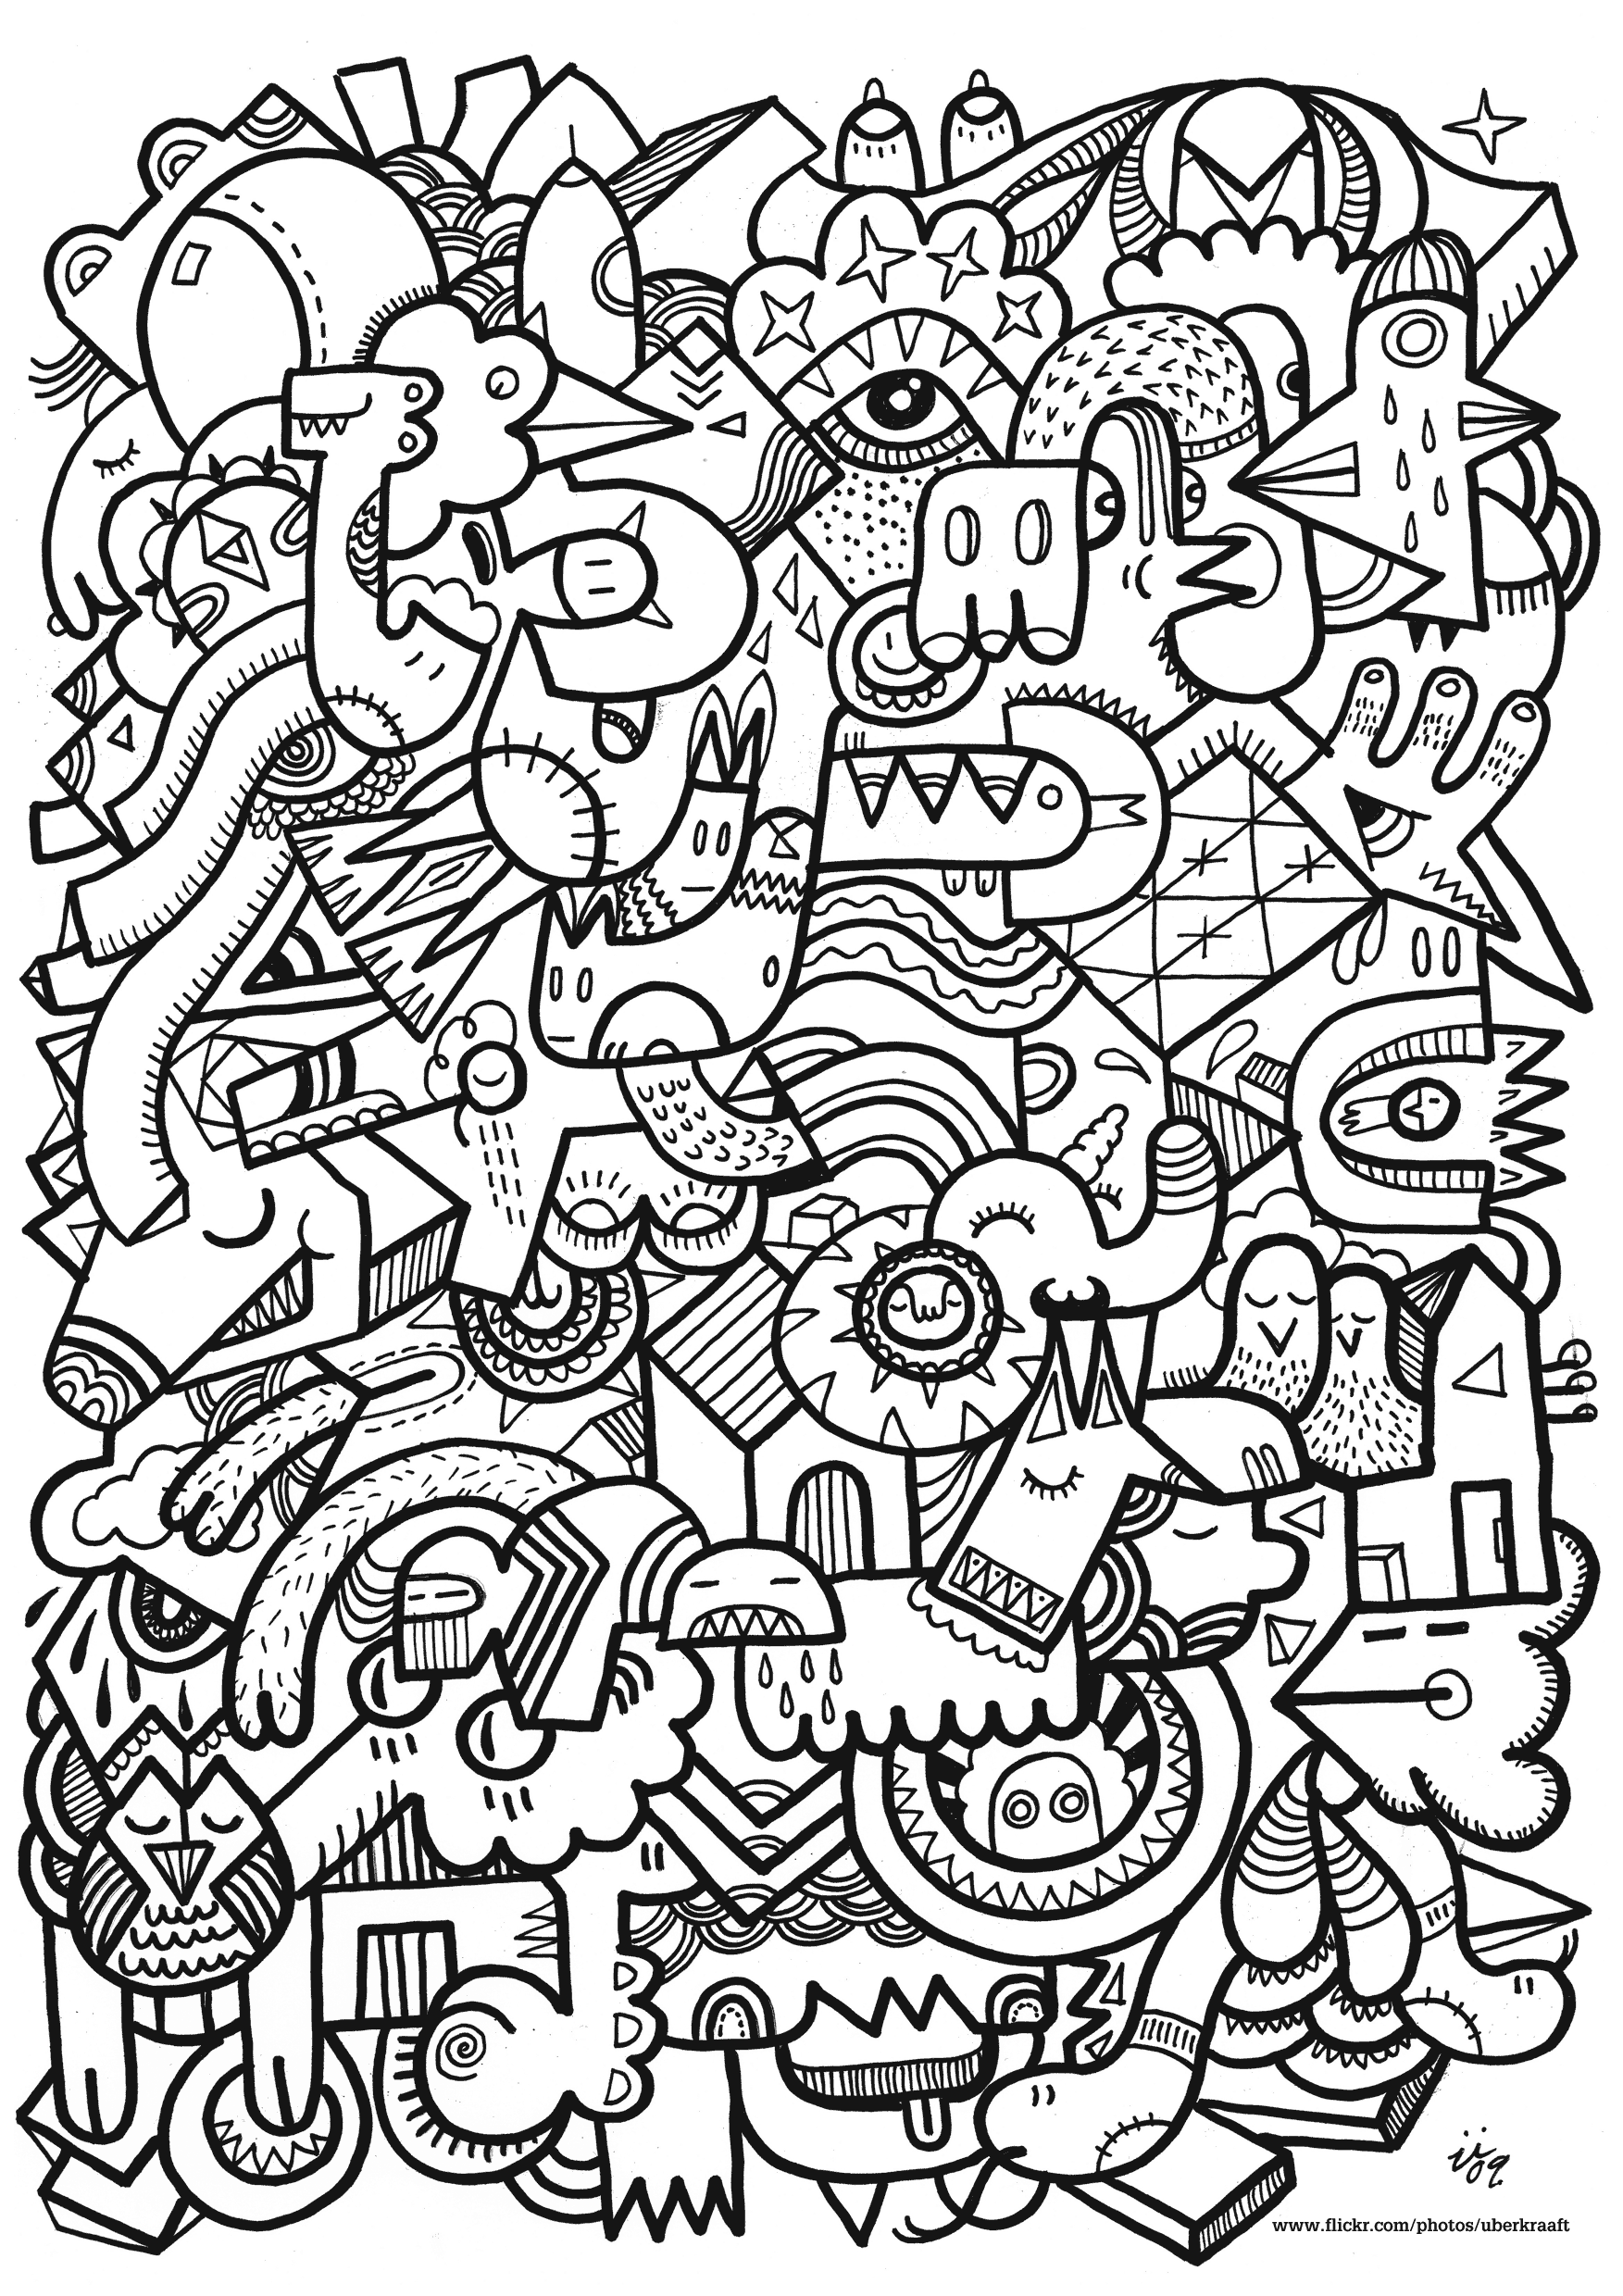 Strange coloring - Anti stress Adult Coloring Pages